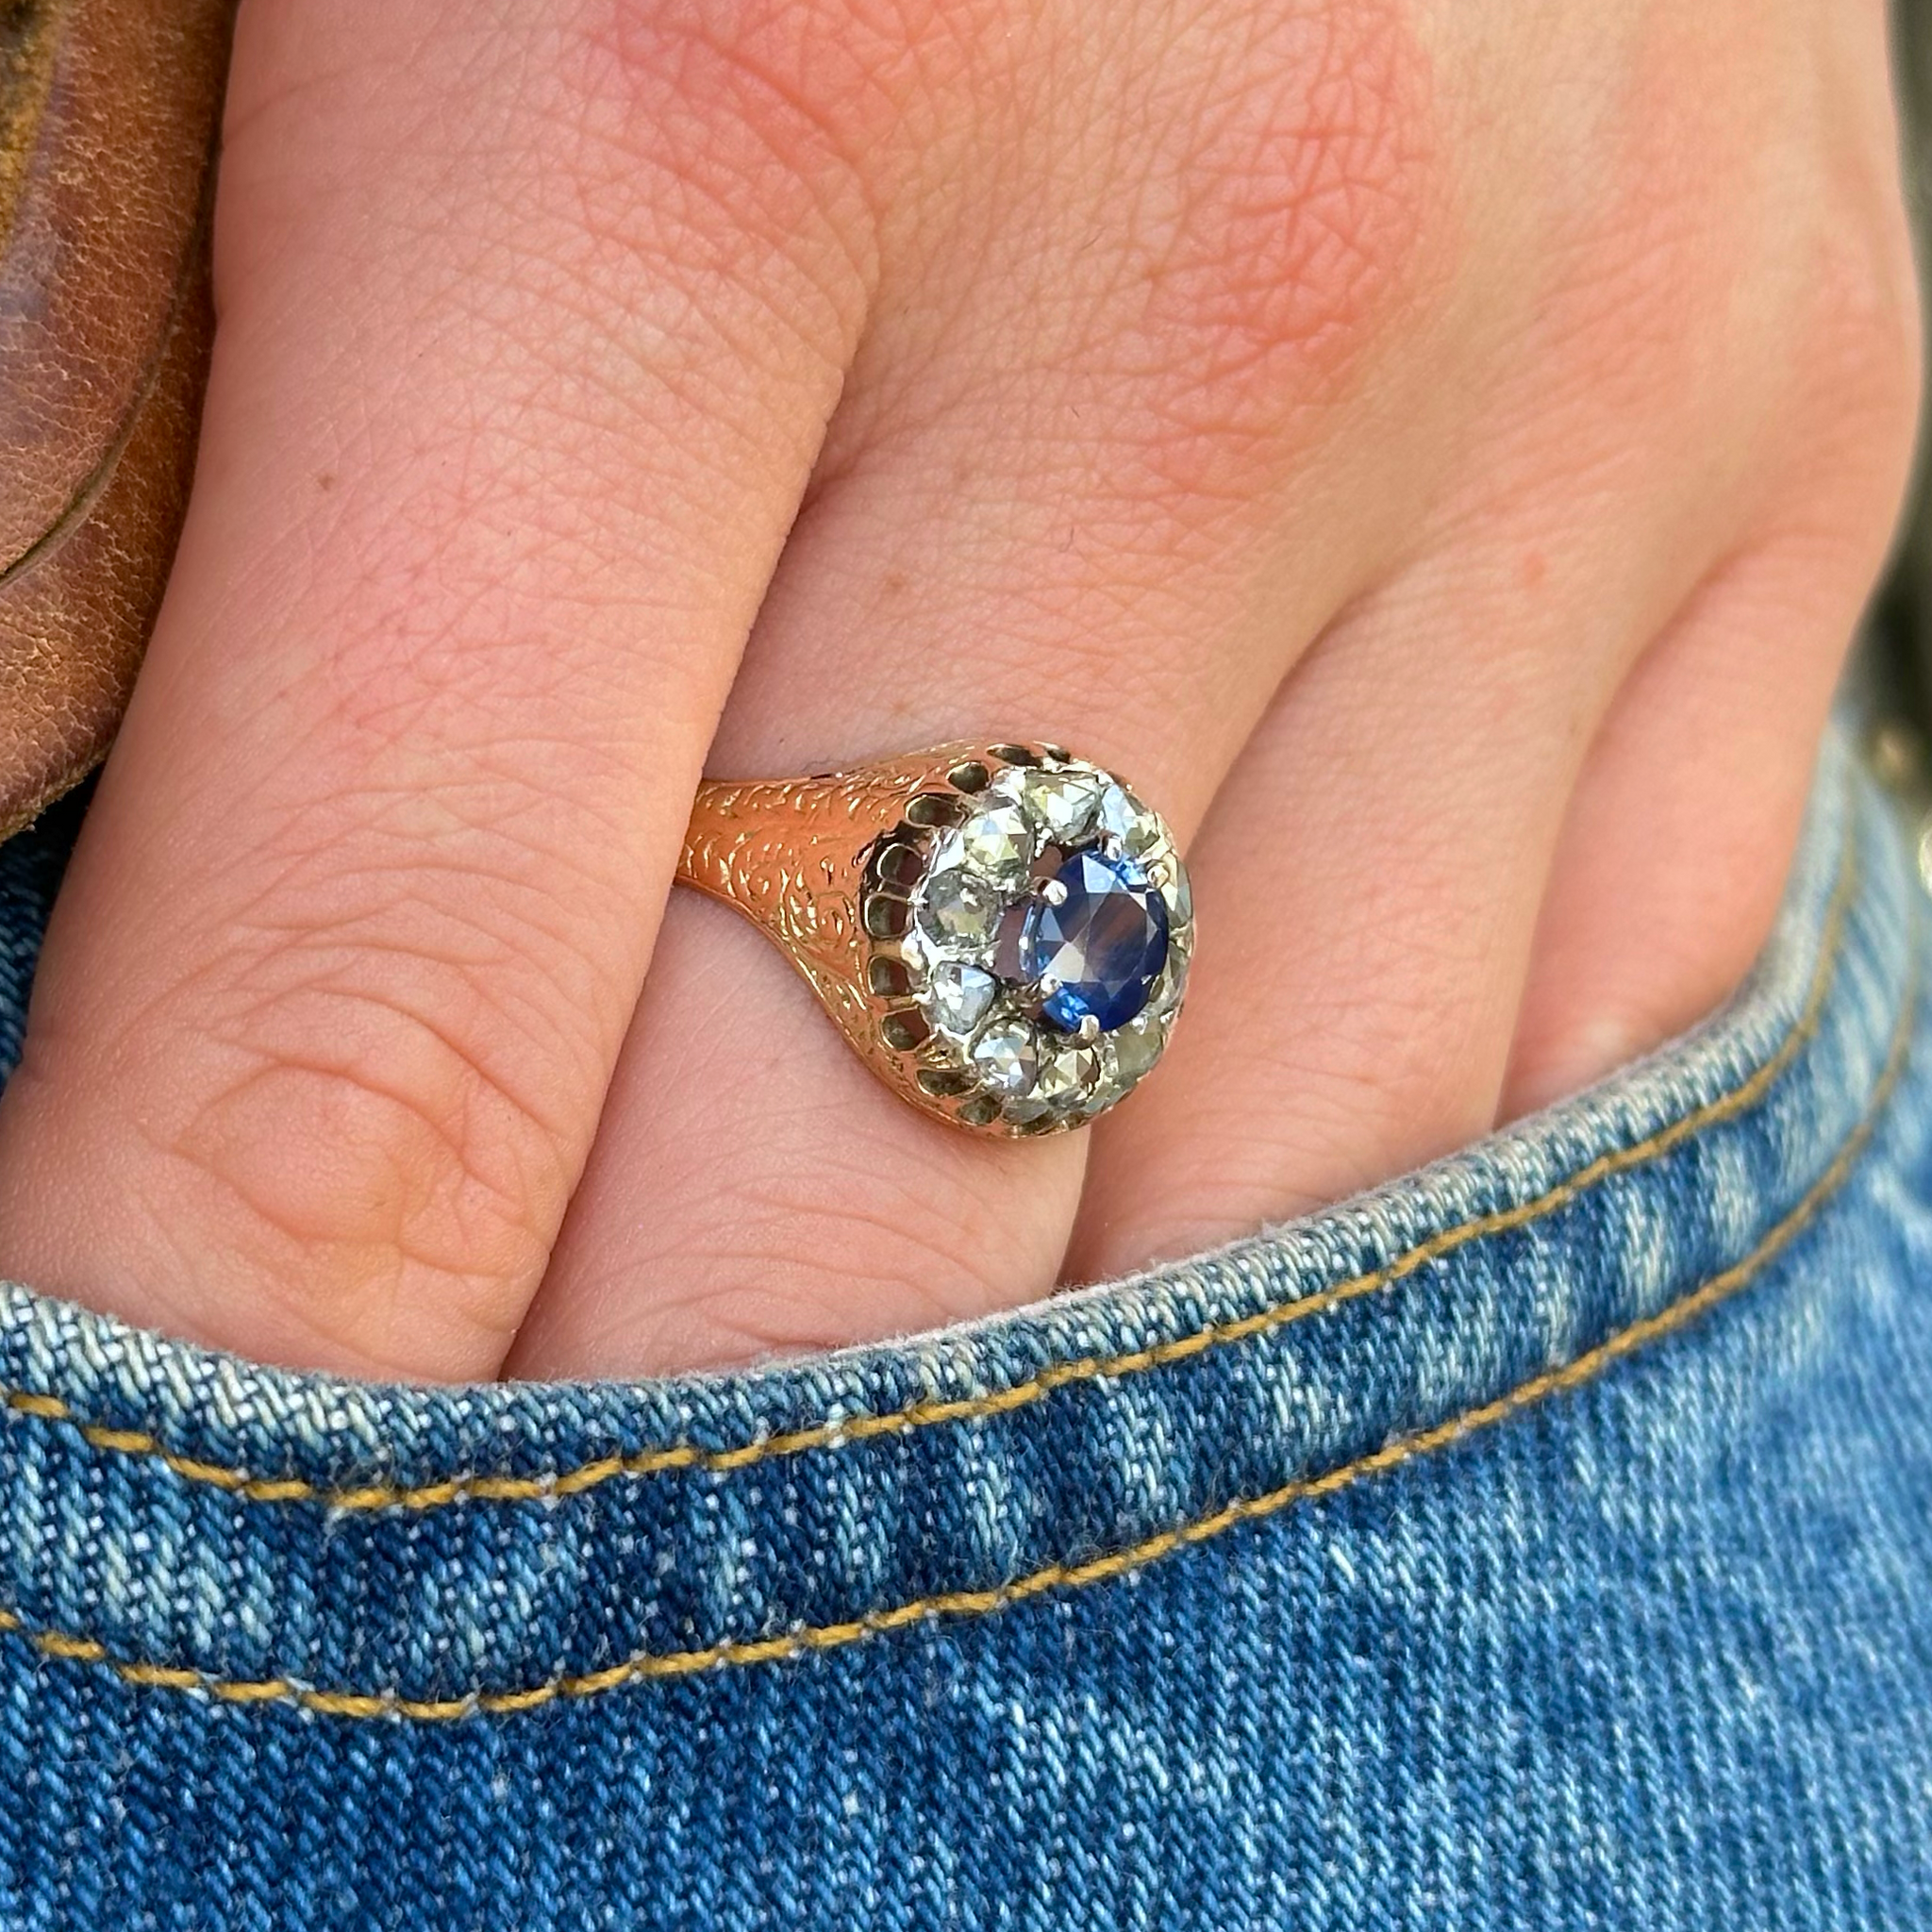 Antique, Victorian Sapphire and Diamond Daisy Cluster Ring, 18ct Yellow Gold worn on hand in pocket of jeans